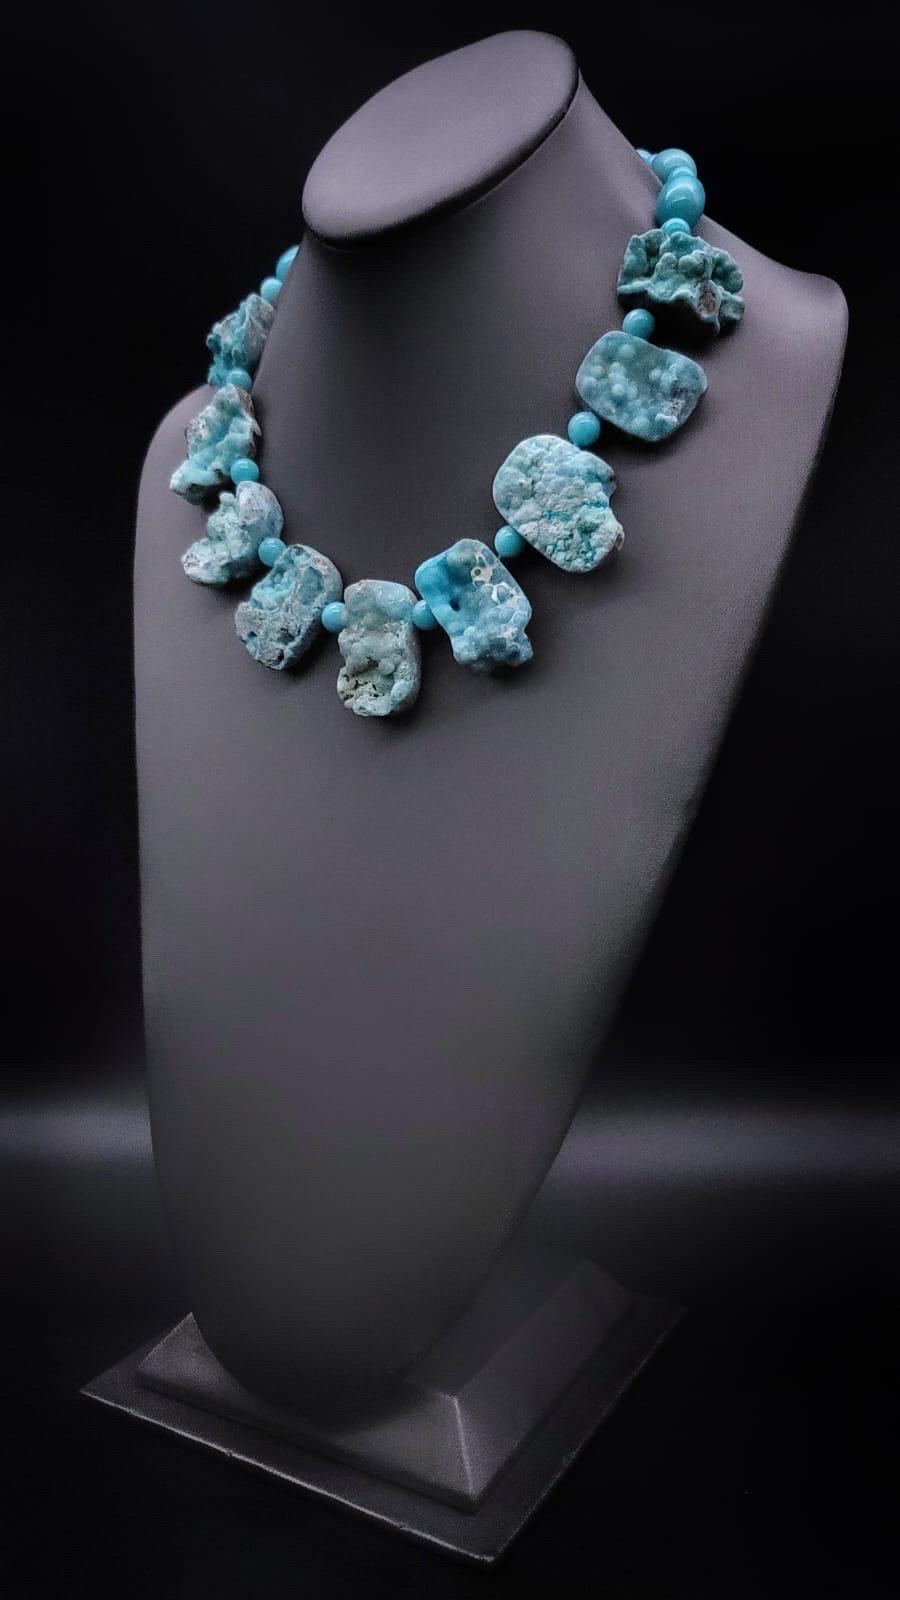 One-of-a-Kind

Hemimorphite- a most unusual gemstone because of its unique physical properties and difficulties in cutting, hemimorphite is best left in its natural druzy form. The light-to-dark teal crystals cling to the rock. The stunning rough